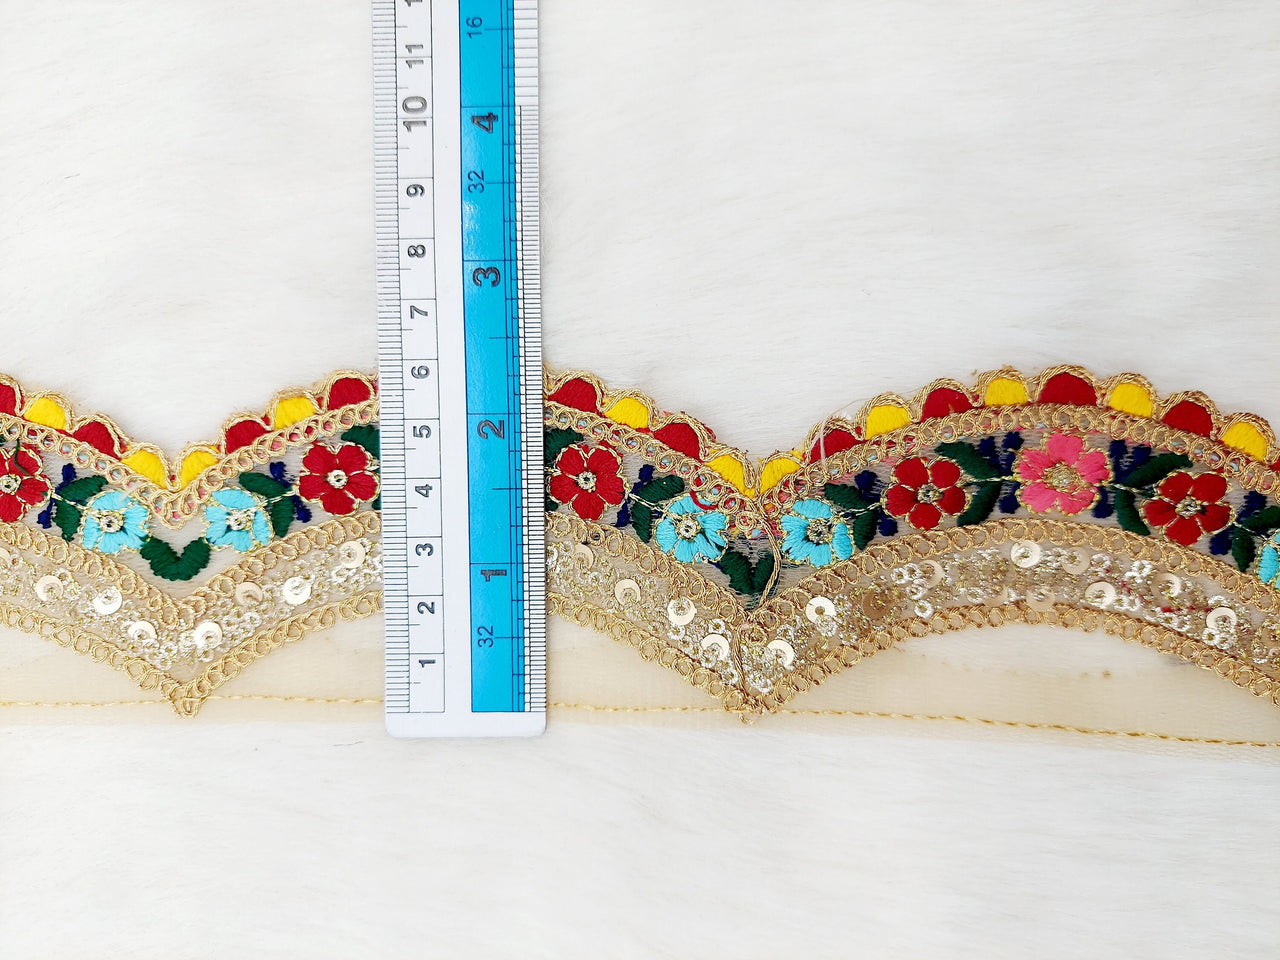 9 Yards Scallop Sequin Floral Border, Beige Shimmer Tissue Fabric Lace Trim Flowers Embroidery, Floral Sari Trimming